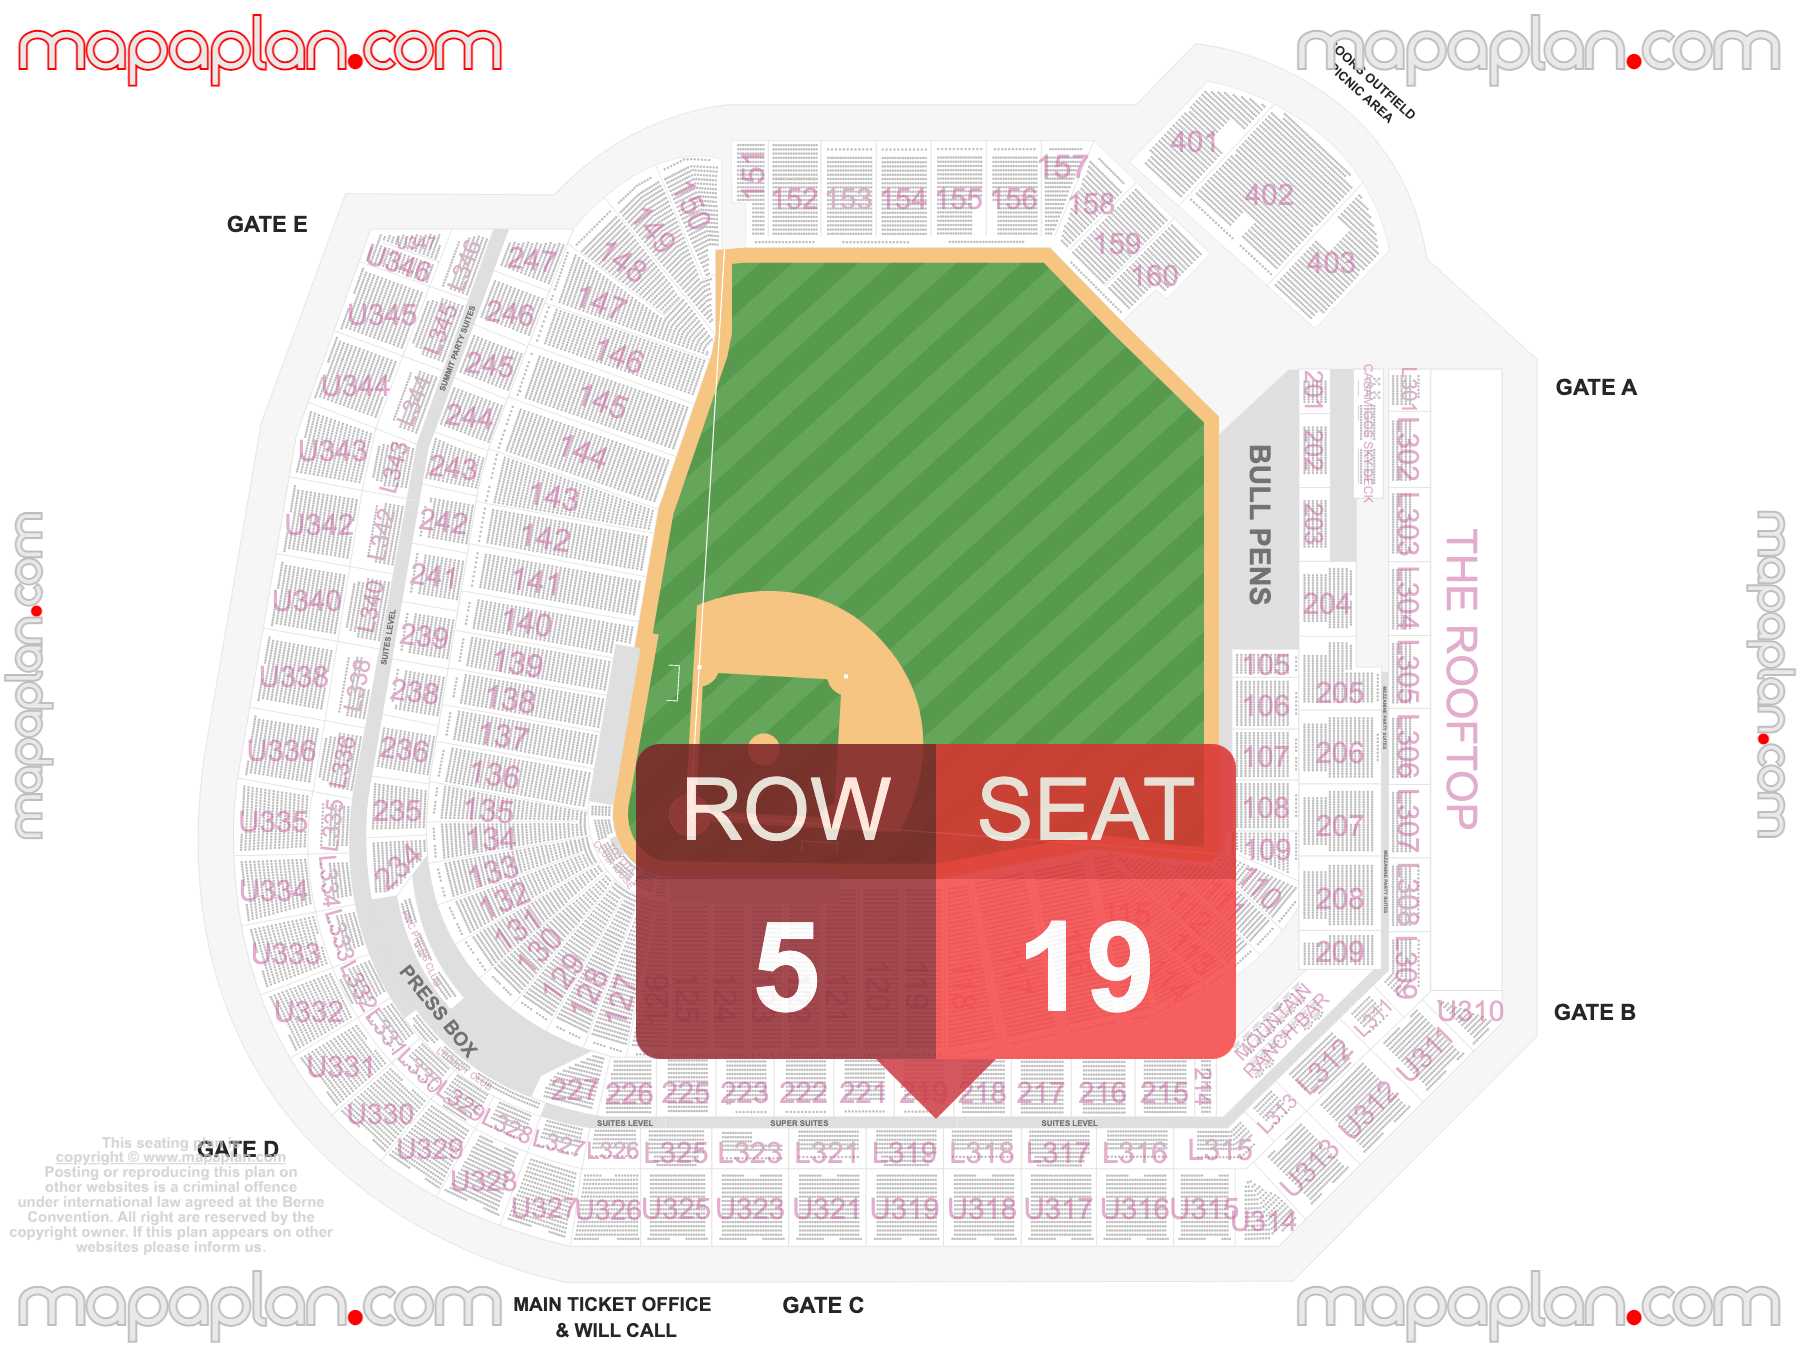 Denver Coors Field seating chart Concert & Colorado Rockies Baseball inside capacity view arrangement plan - Interactive virtual 3d best seats & rows detailed stadium image configuration layout